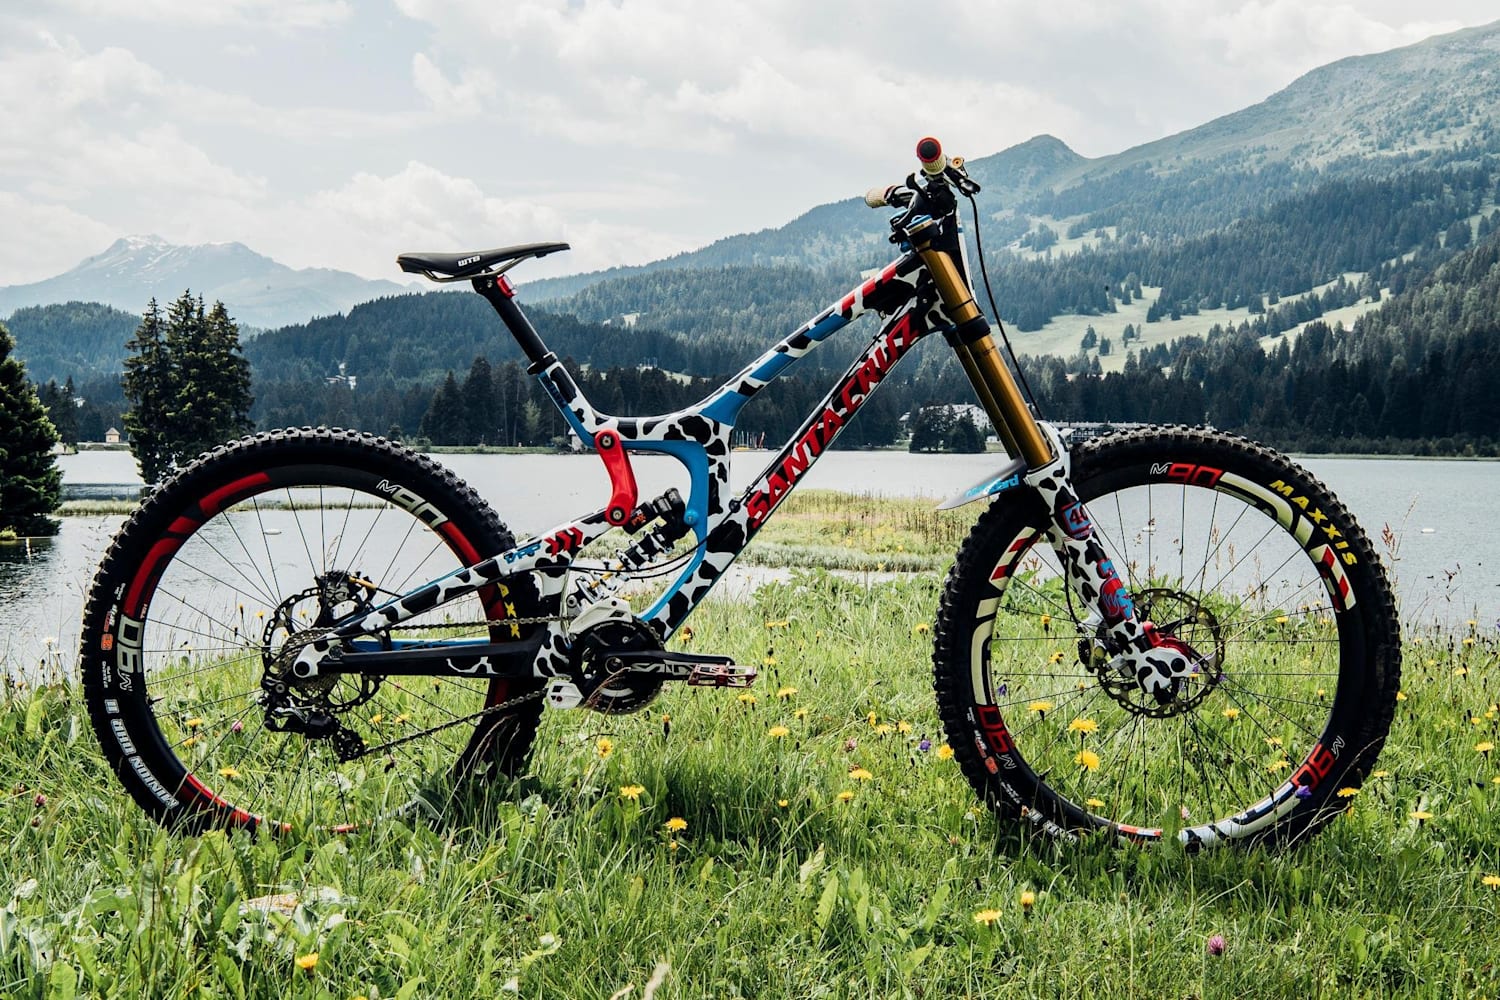 How to customize a mountain bike: 5 great upgrades